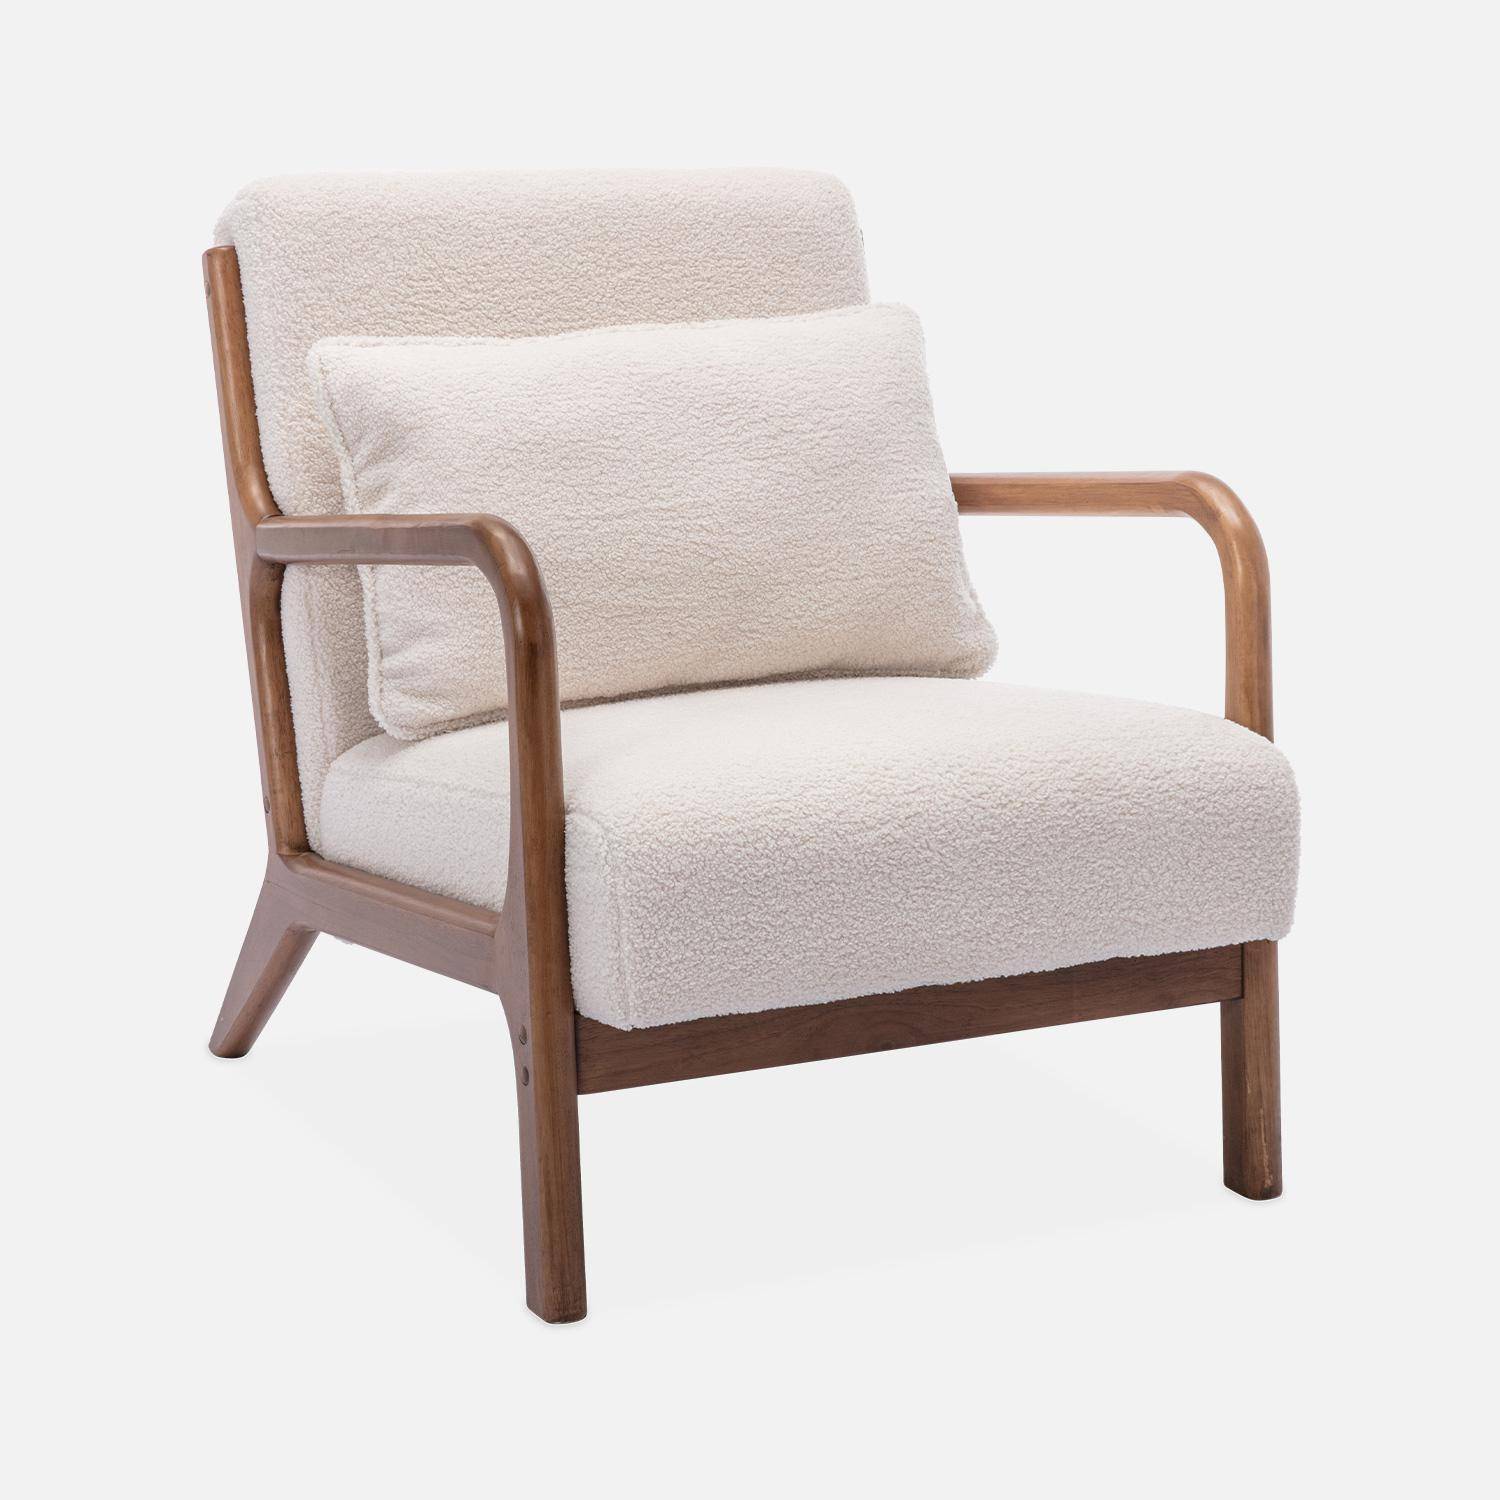 Cosy boucle wooden armchair with scandi-style compass legs and cushion, Light Walnut Stained Hevea Wood, Lorens, White Photo3